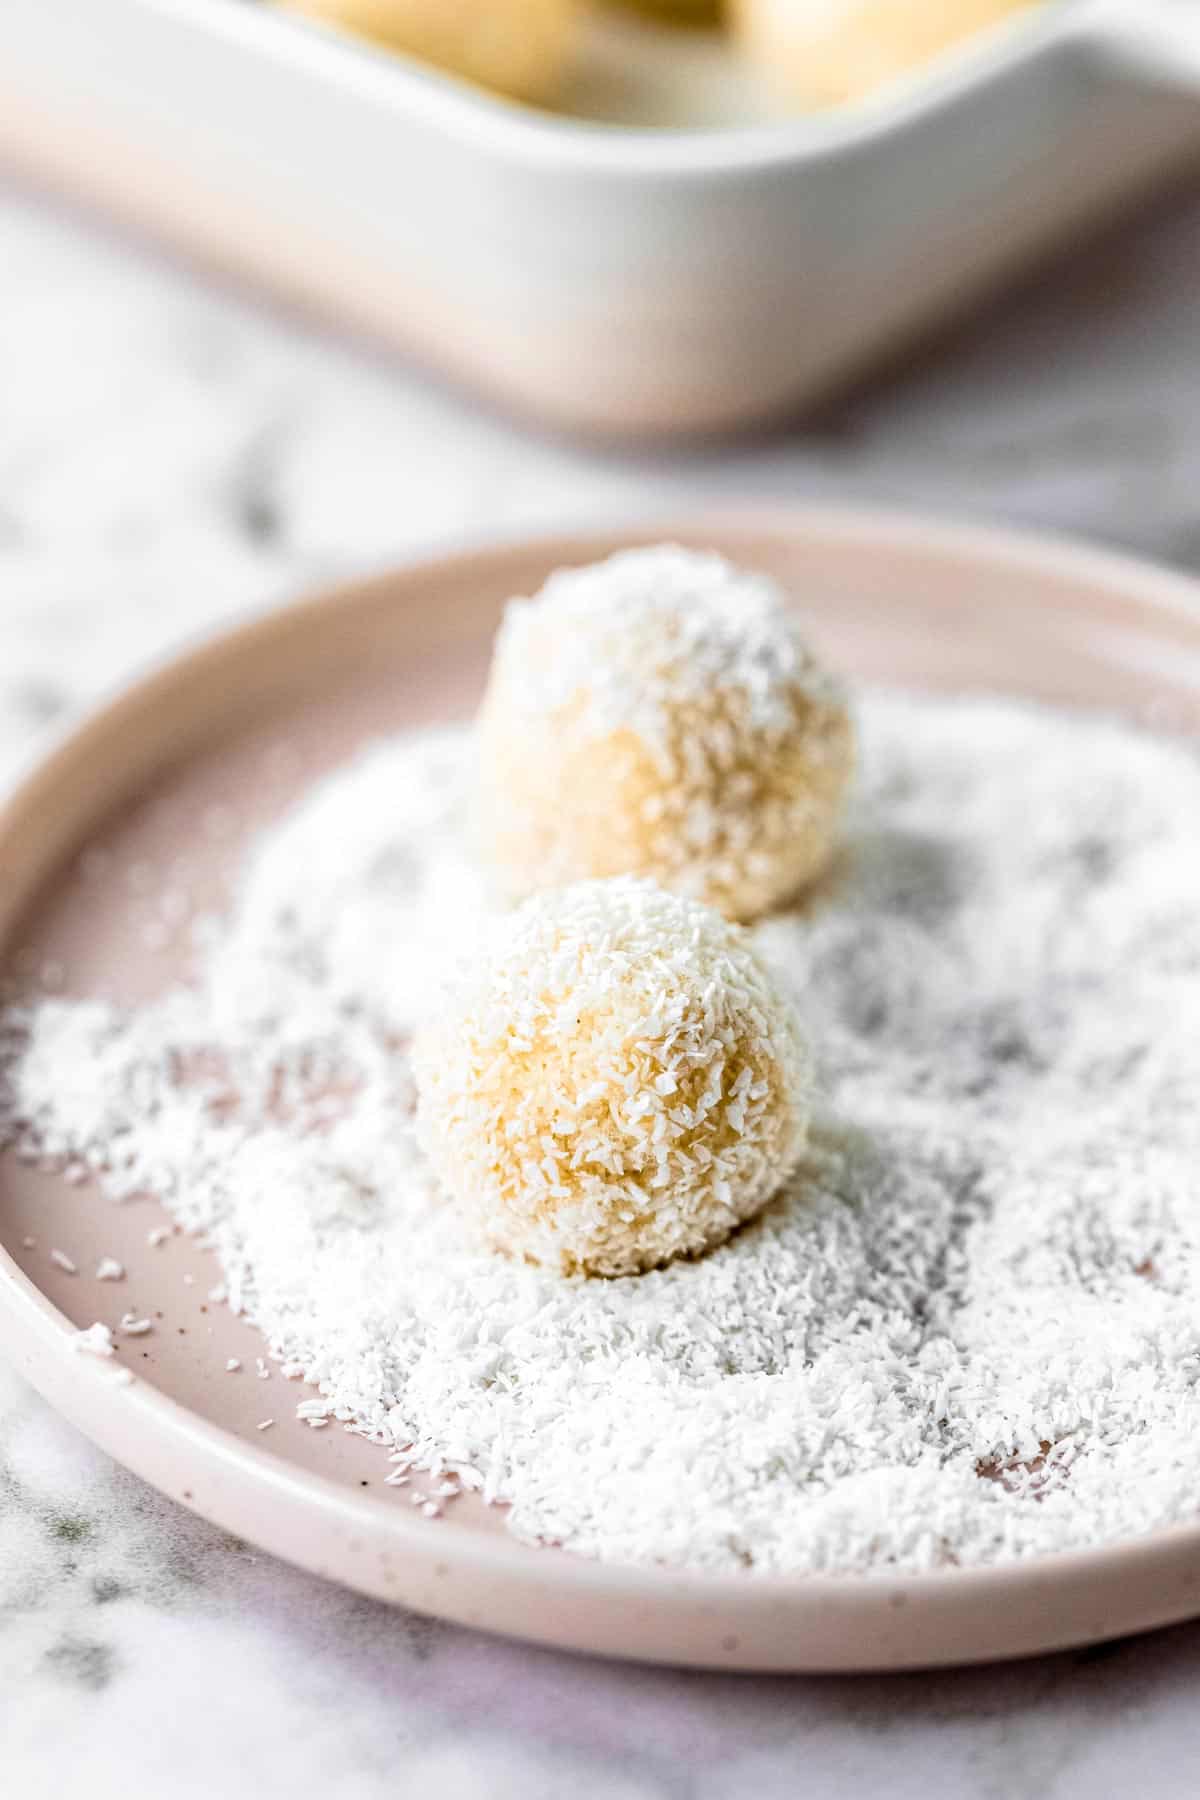 Two bliss balls in a dish of coconut for coating.